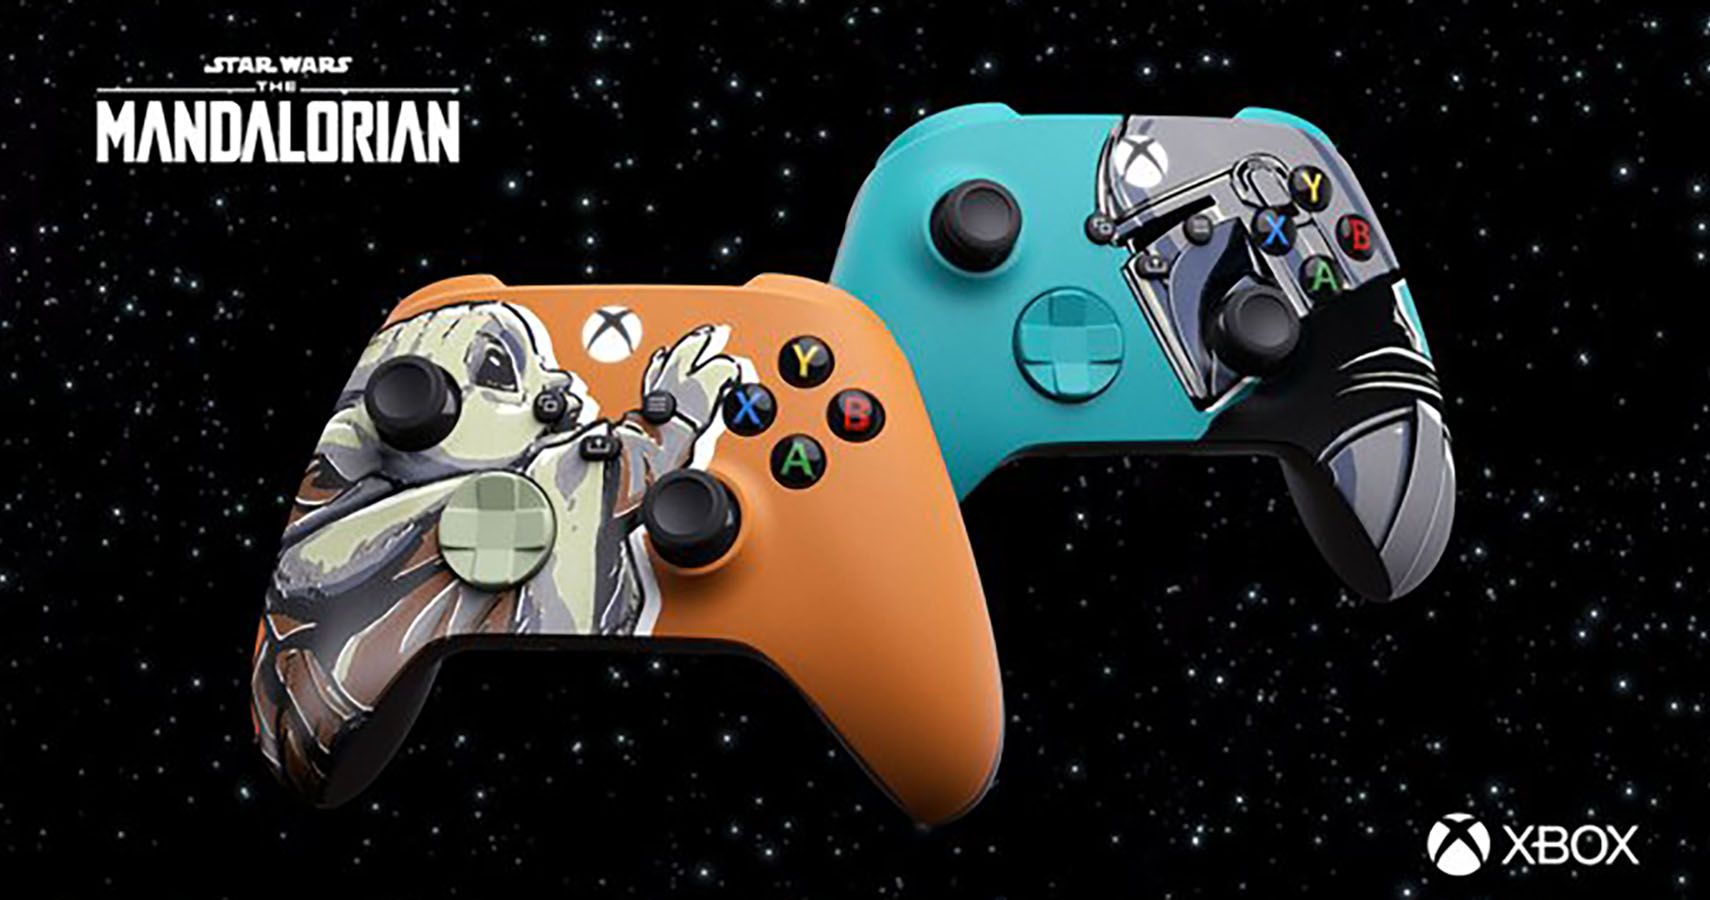 Official image of the Series X|S Mandalorian controllers that Xbox is giving away.